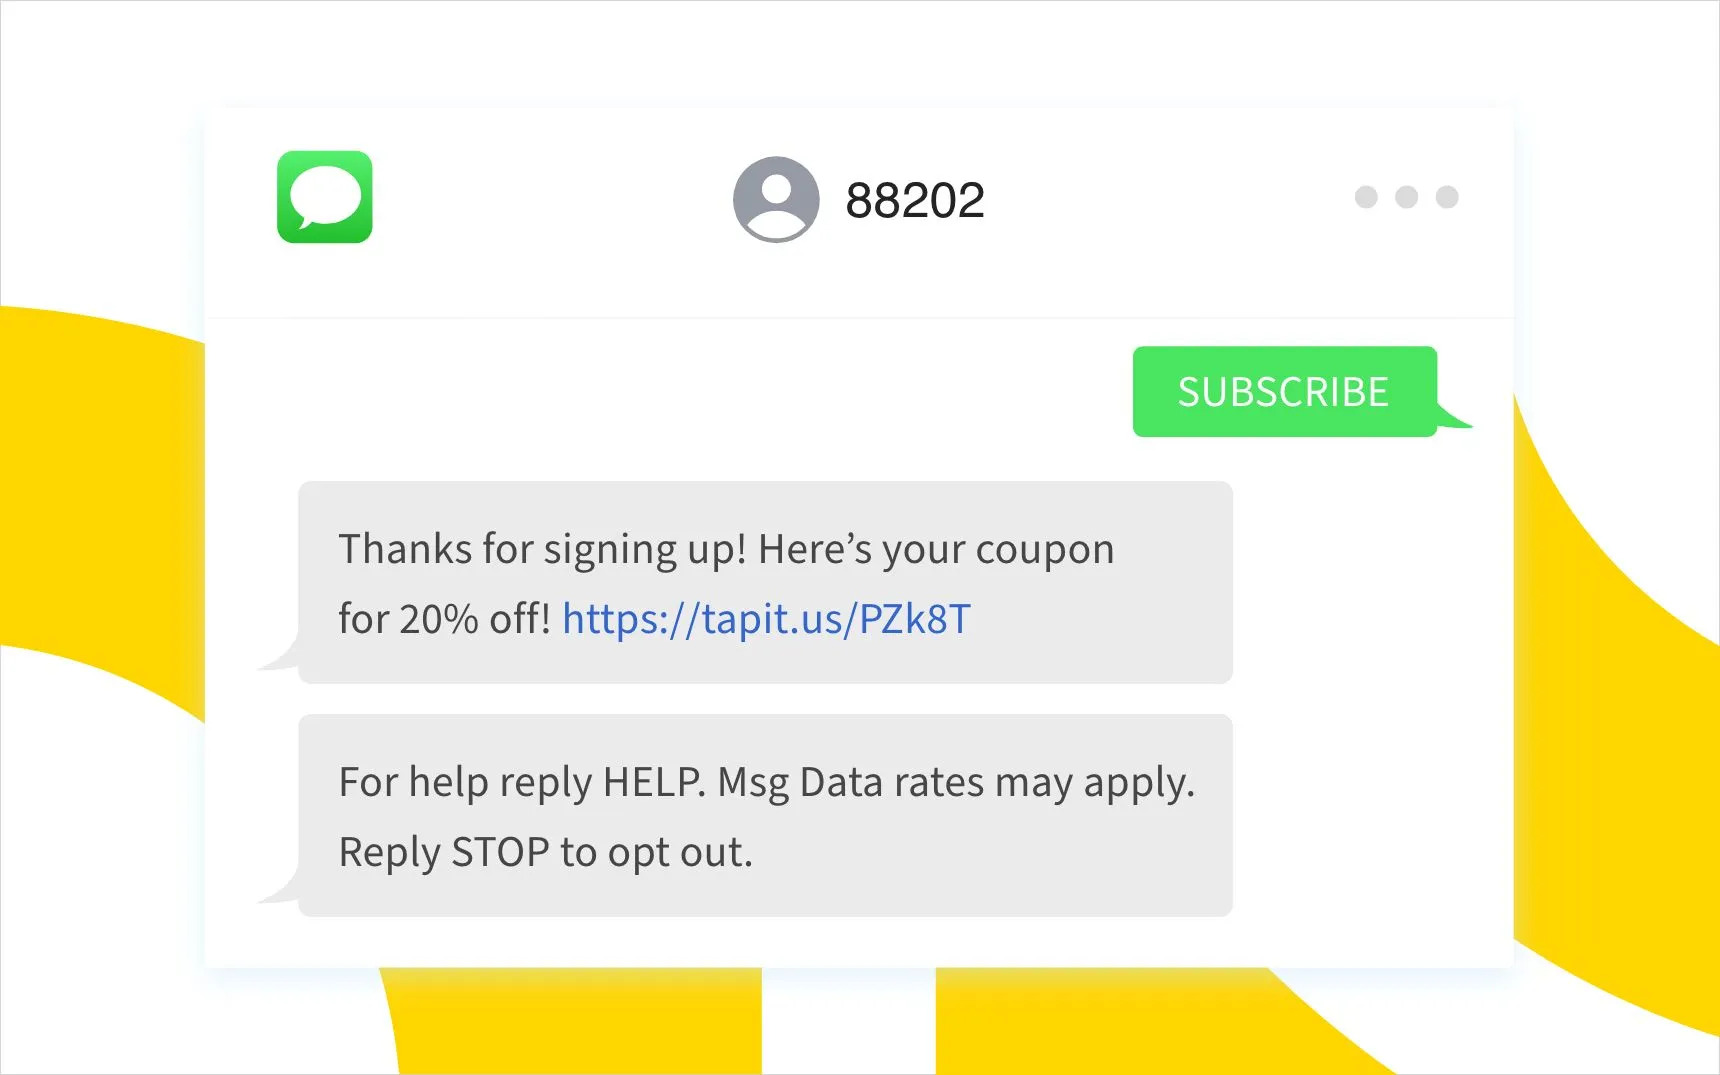 Example of opt-out messaging in SMS marketing